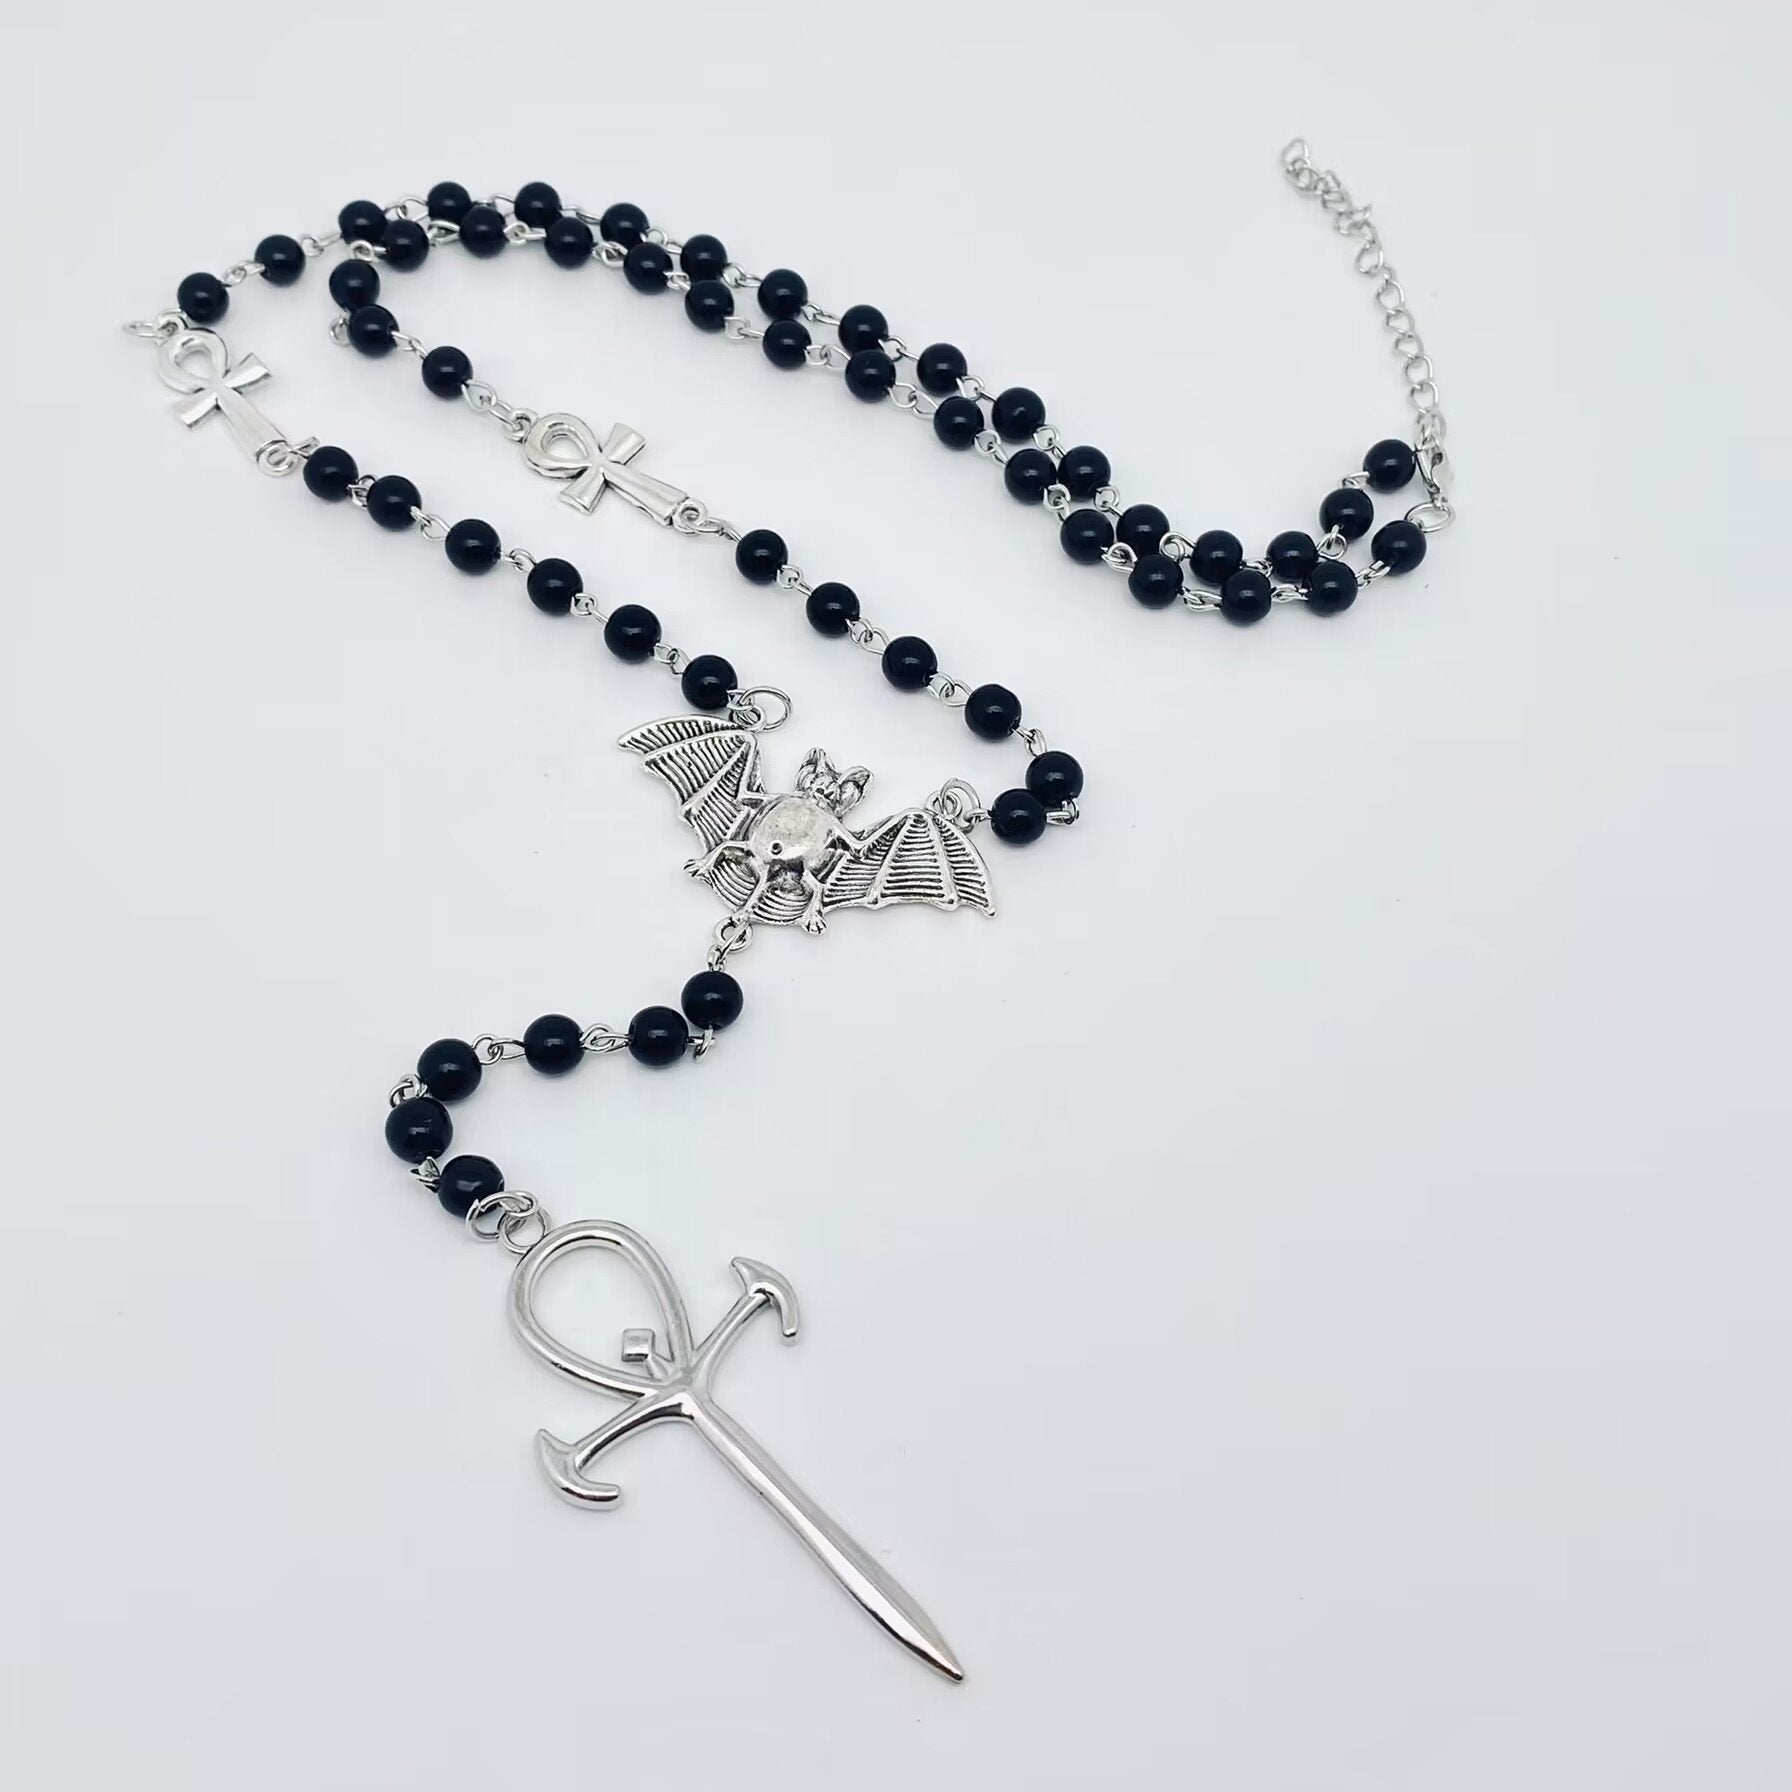 24" black bead rosary-style necklace adorned with shiny silver metal ankh and vampire bat charms, and a 5.5" long center drop finished with a large 2.25" long stylized dagger-like silver metal ankh pendant